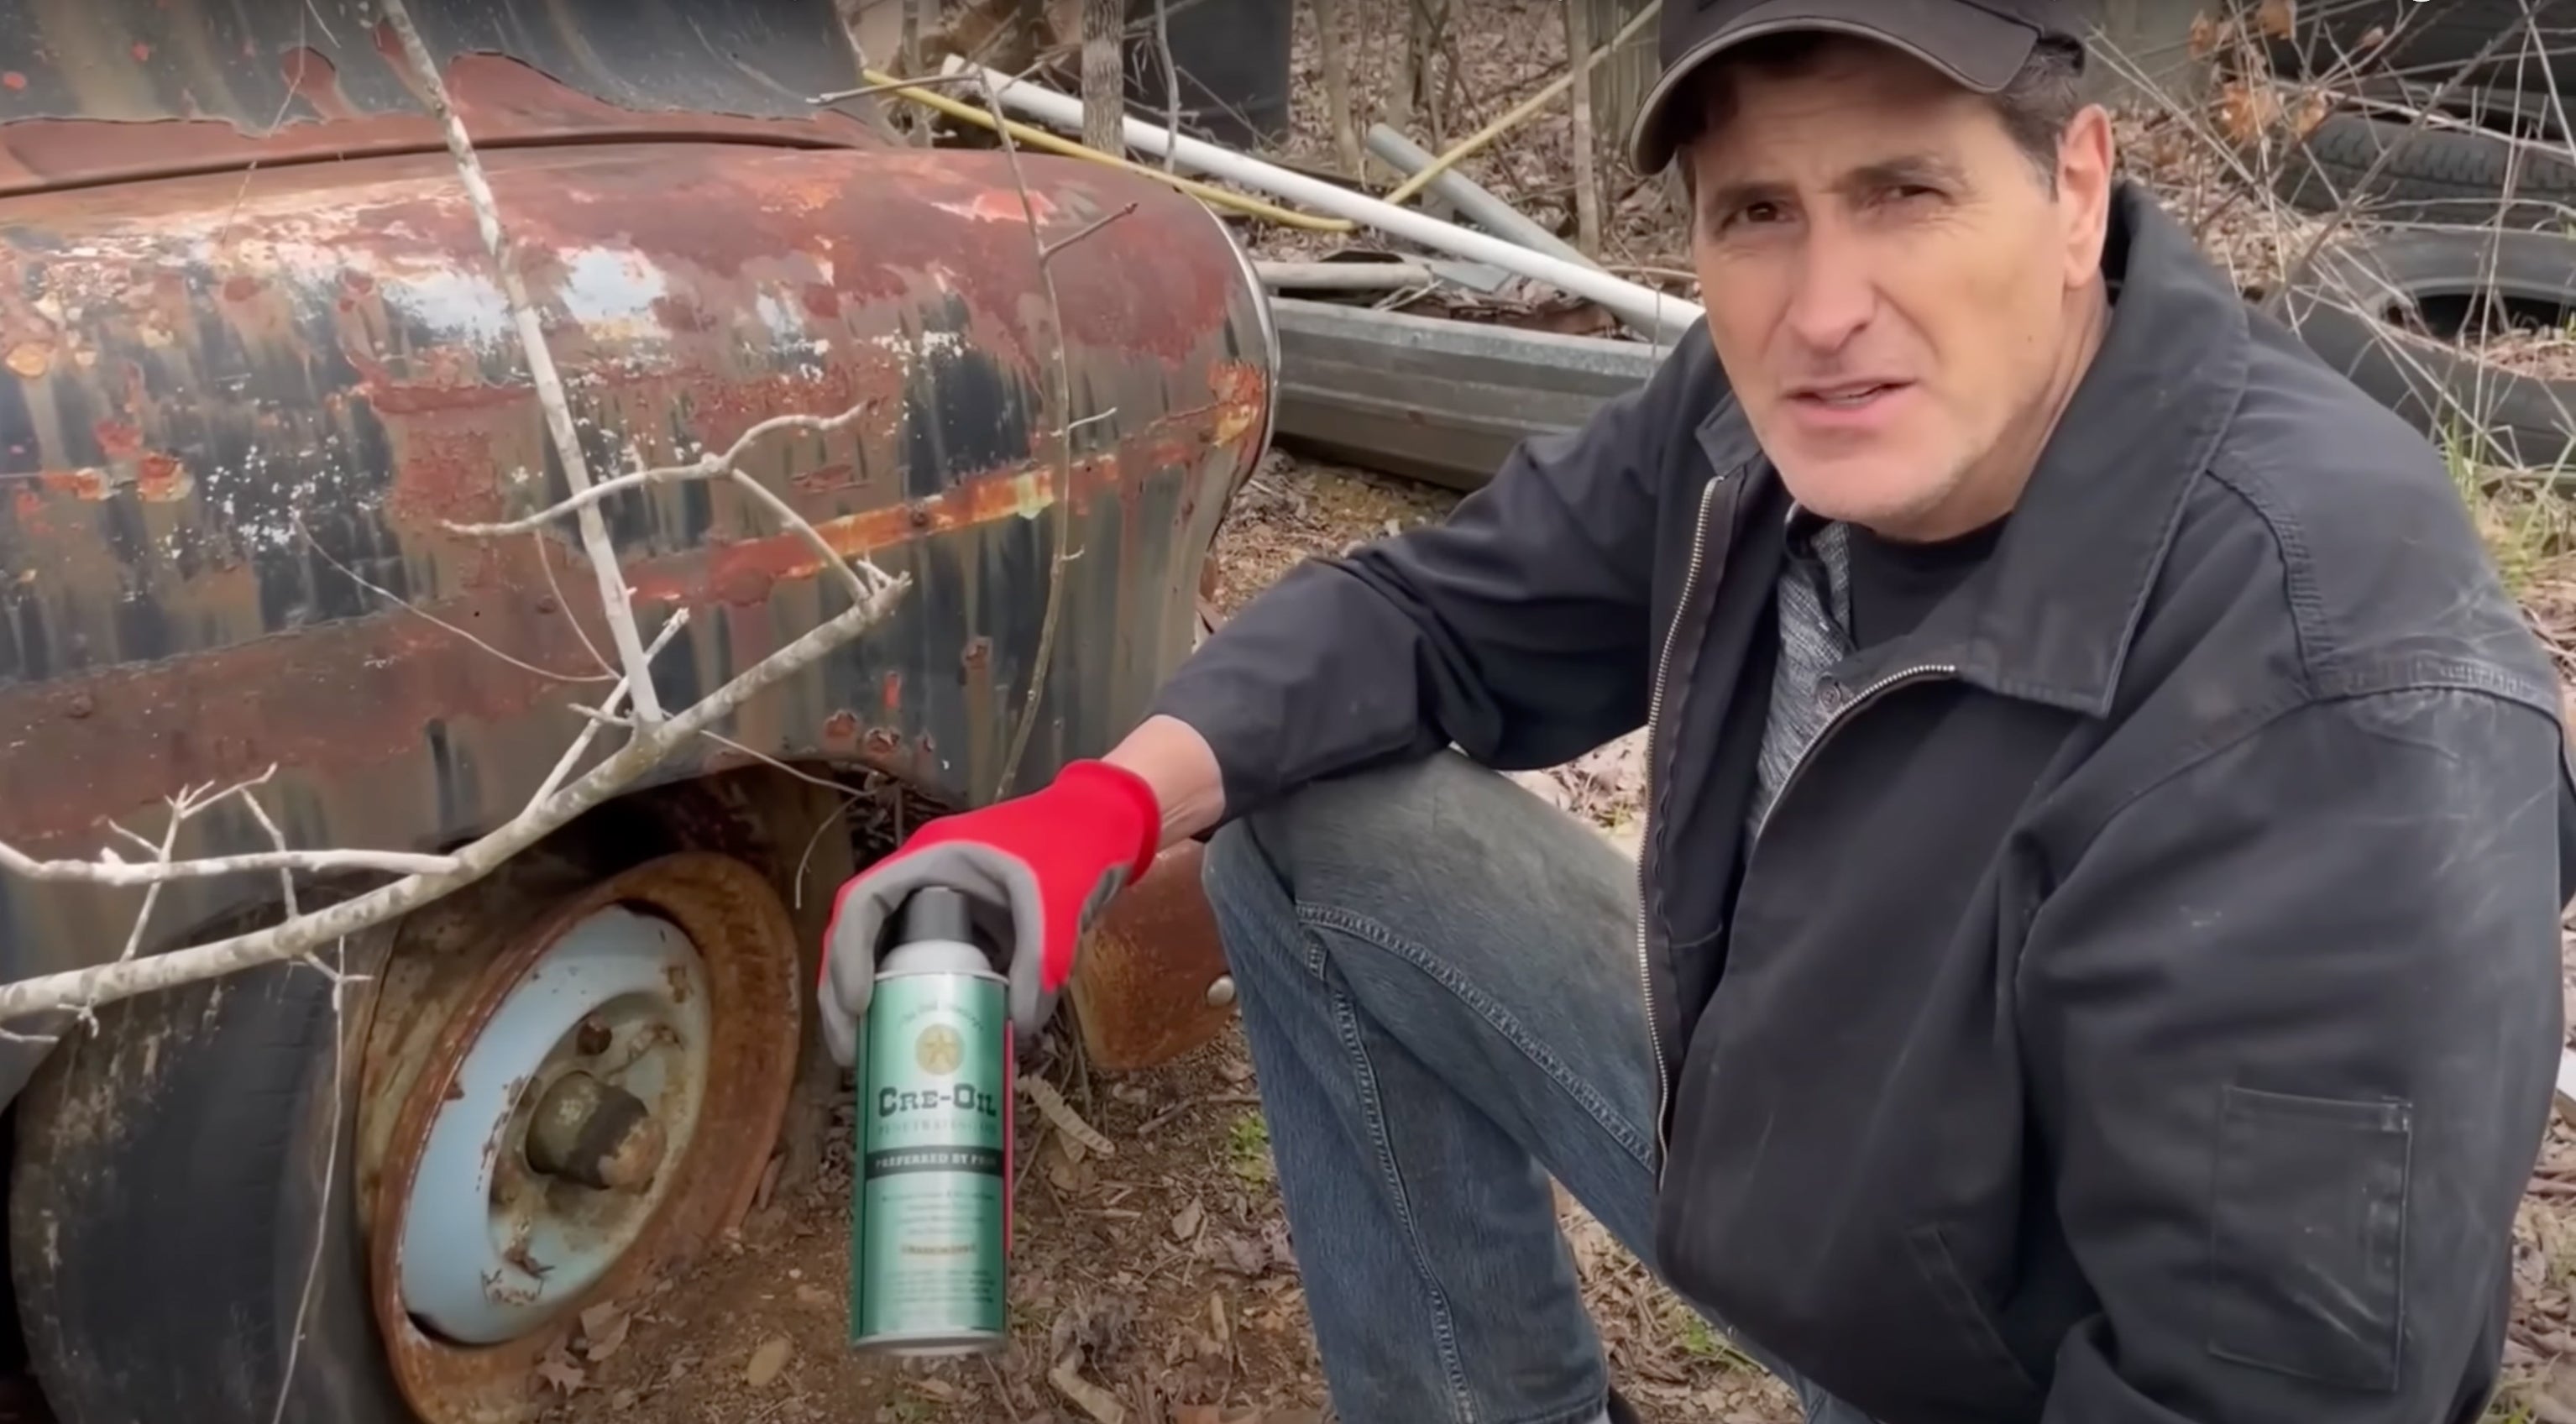 Watch Richard from "What The Rust" Use Cre-Oil to Successfully Remove Frozen Lug Nuts